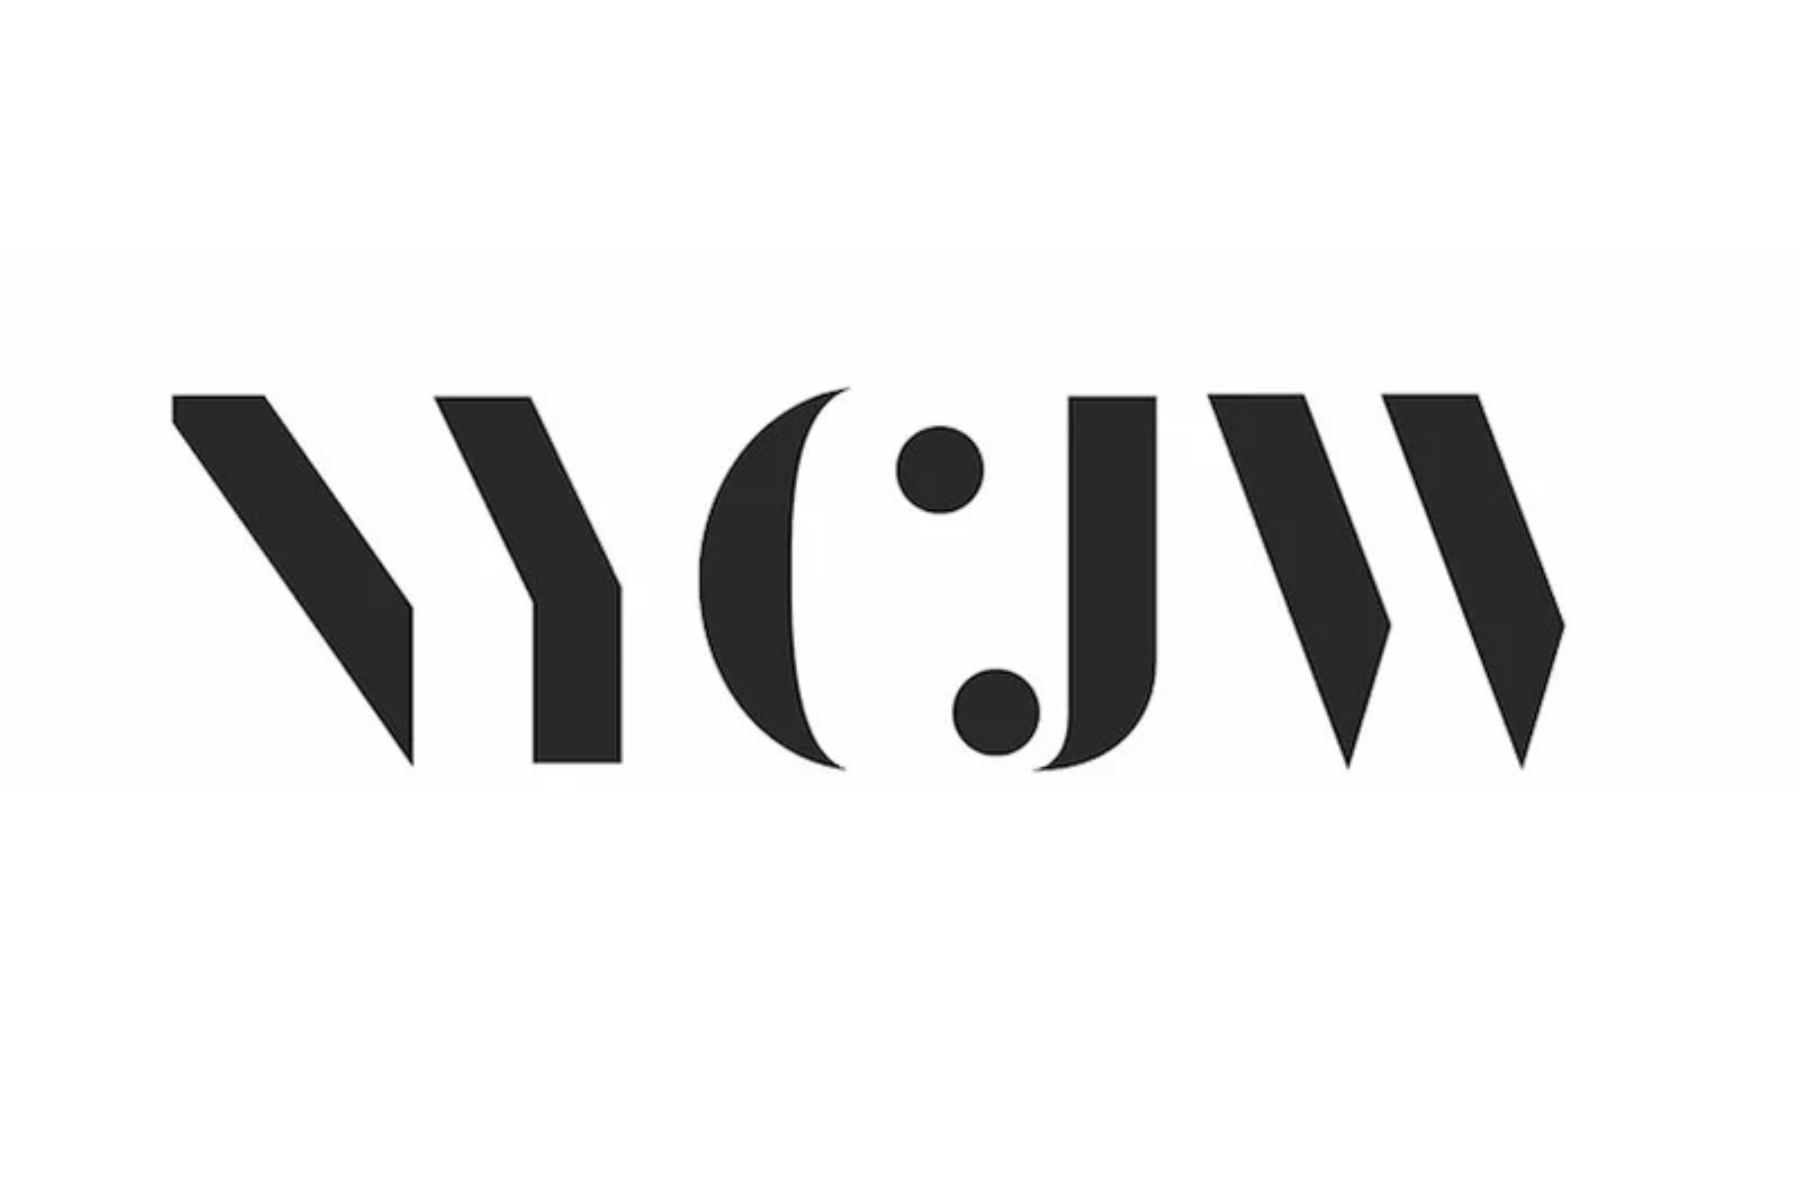 The logo of NYCJW